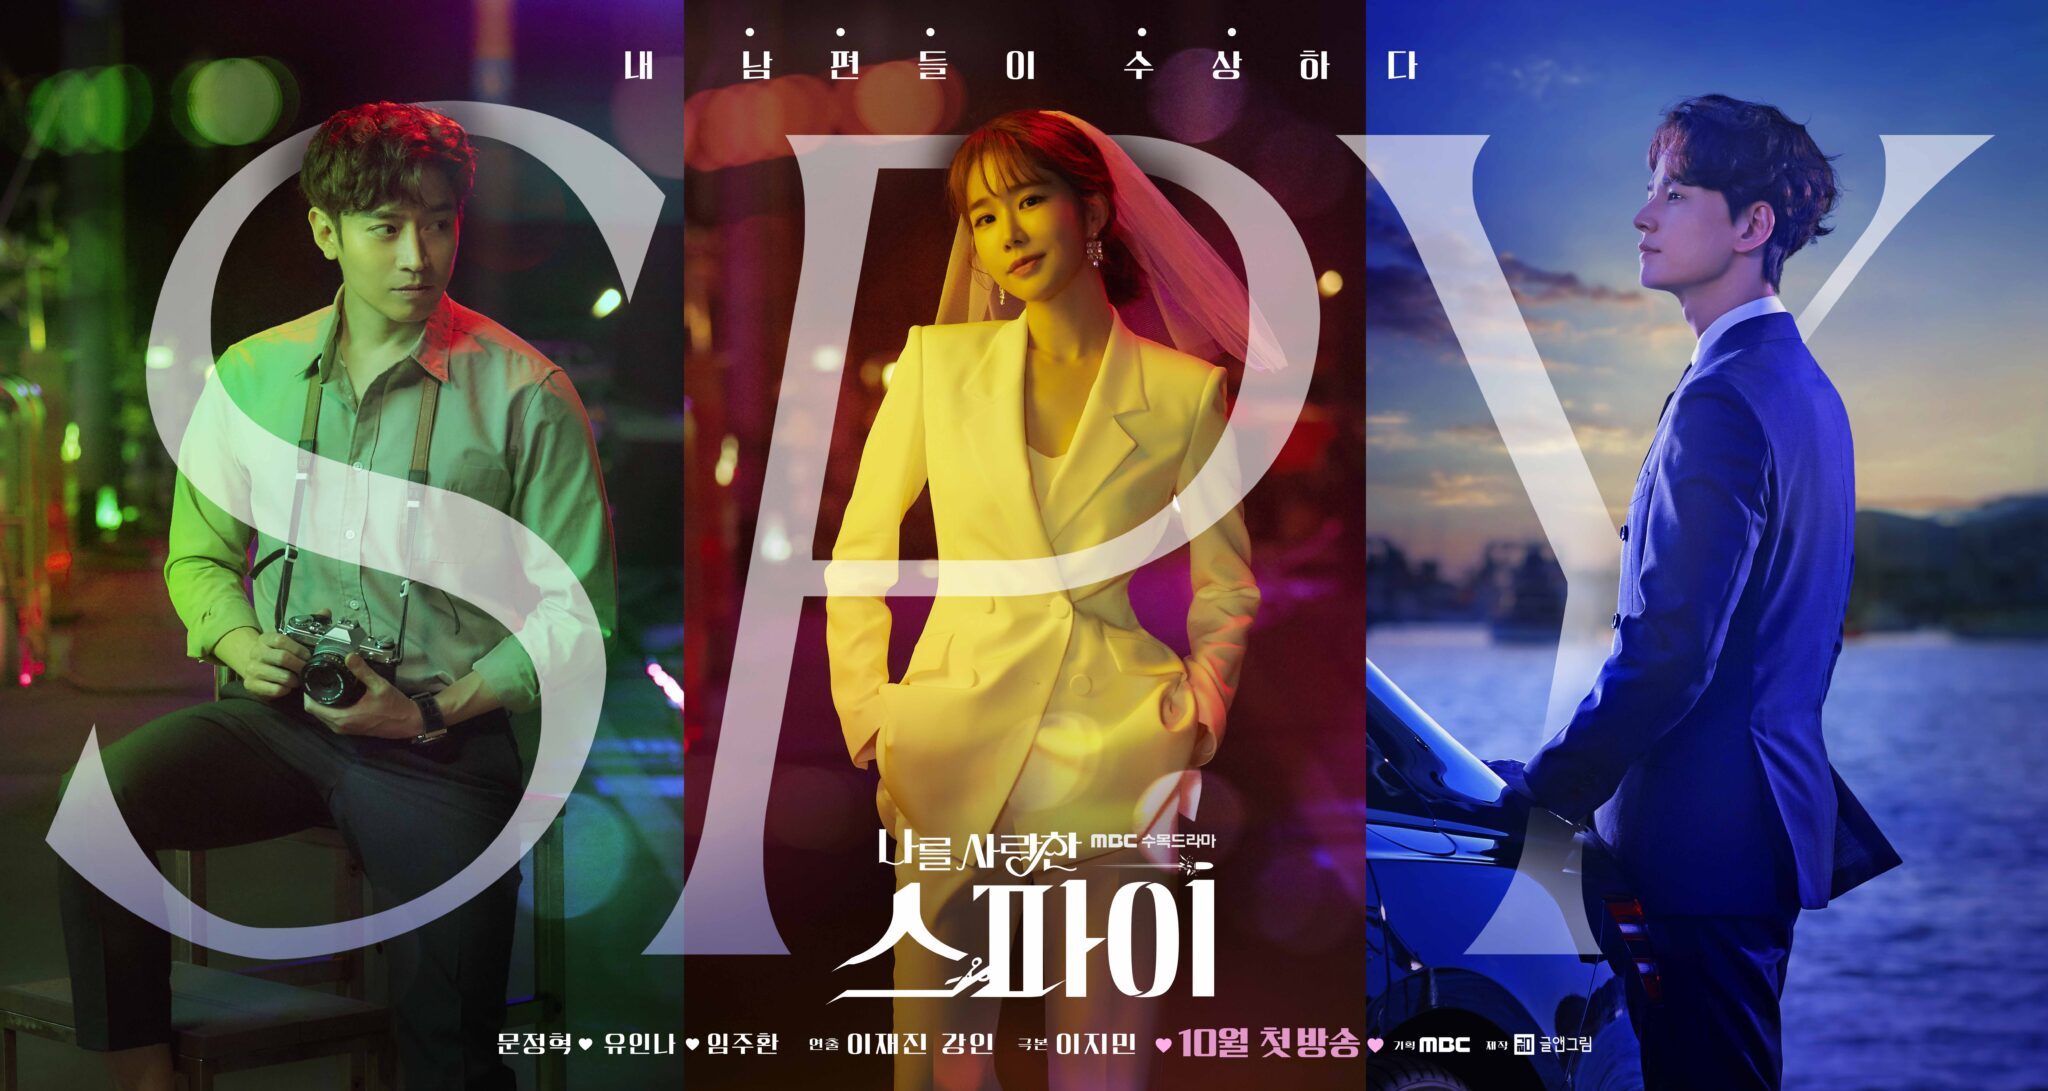 New teaser for The Spy Who Loved Me with Yoo Inna, Eric, and Im Joo-hwan